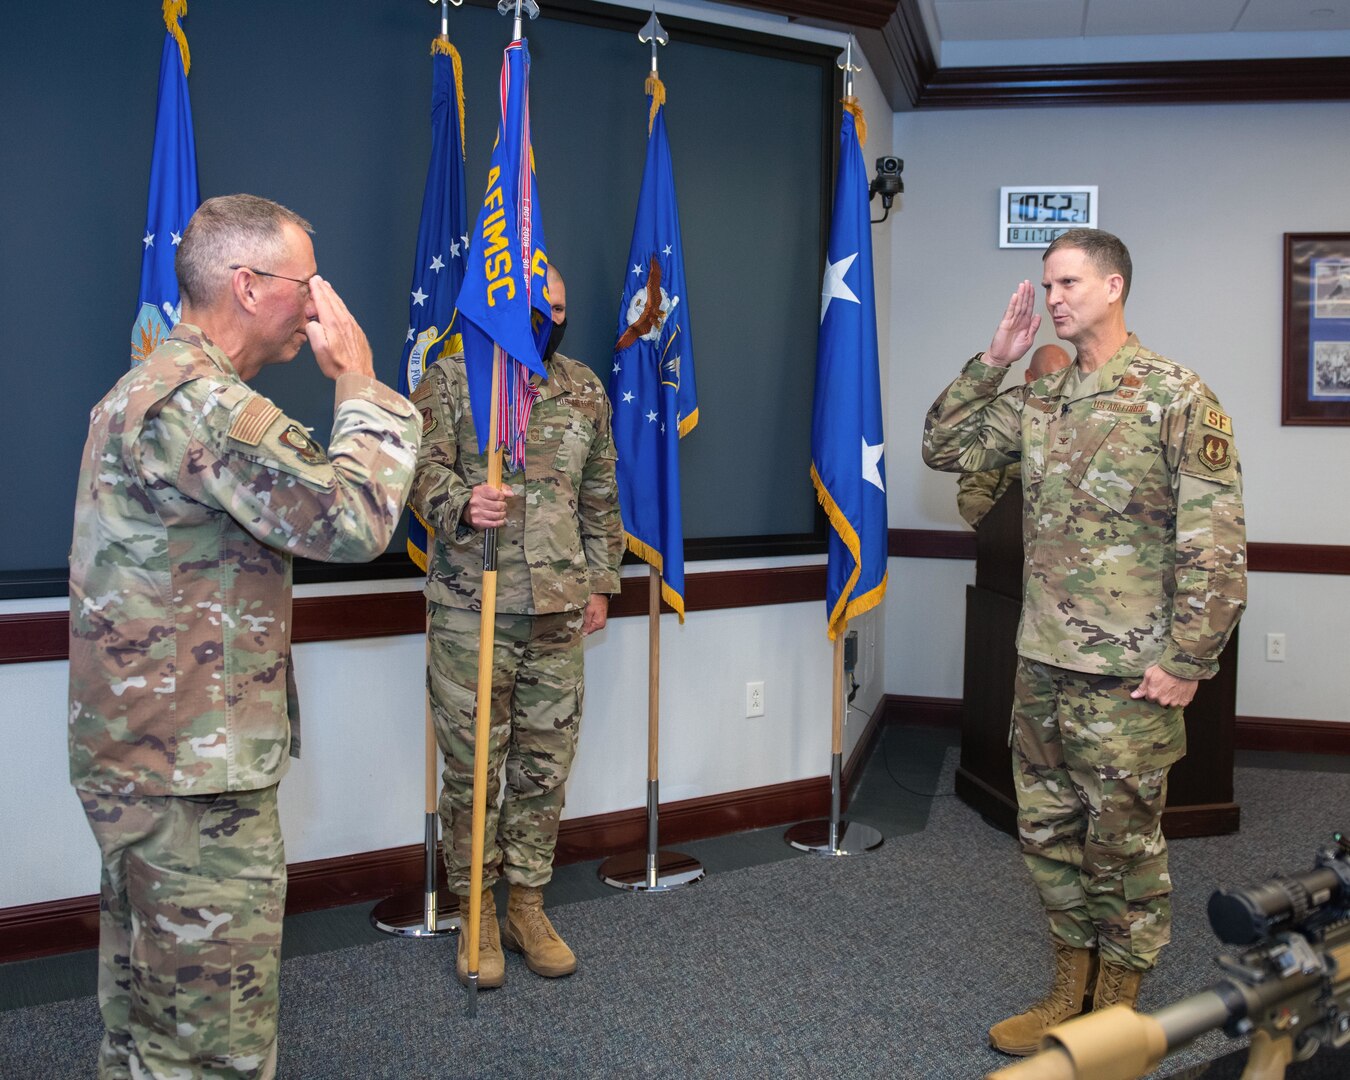 Col. Aaron Guill, right, Air Force Security Forces Center gaining commander, salutes Maj. Gen. Tom Wilcox, Air Force Installation and Mission Support Center commander, during the AFSFC change of command ceremony held at Joint Base San Antonio-Lackland, Texas, Aug. 11, 2020. Guill gained command from Col. Brian S. Greenroad. (U.S. Air Force photo by Sarayuth Pinthong)